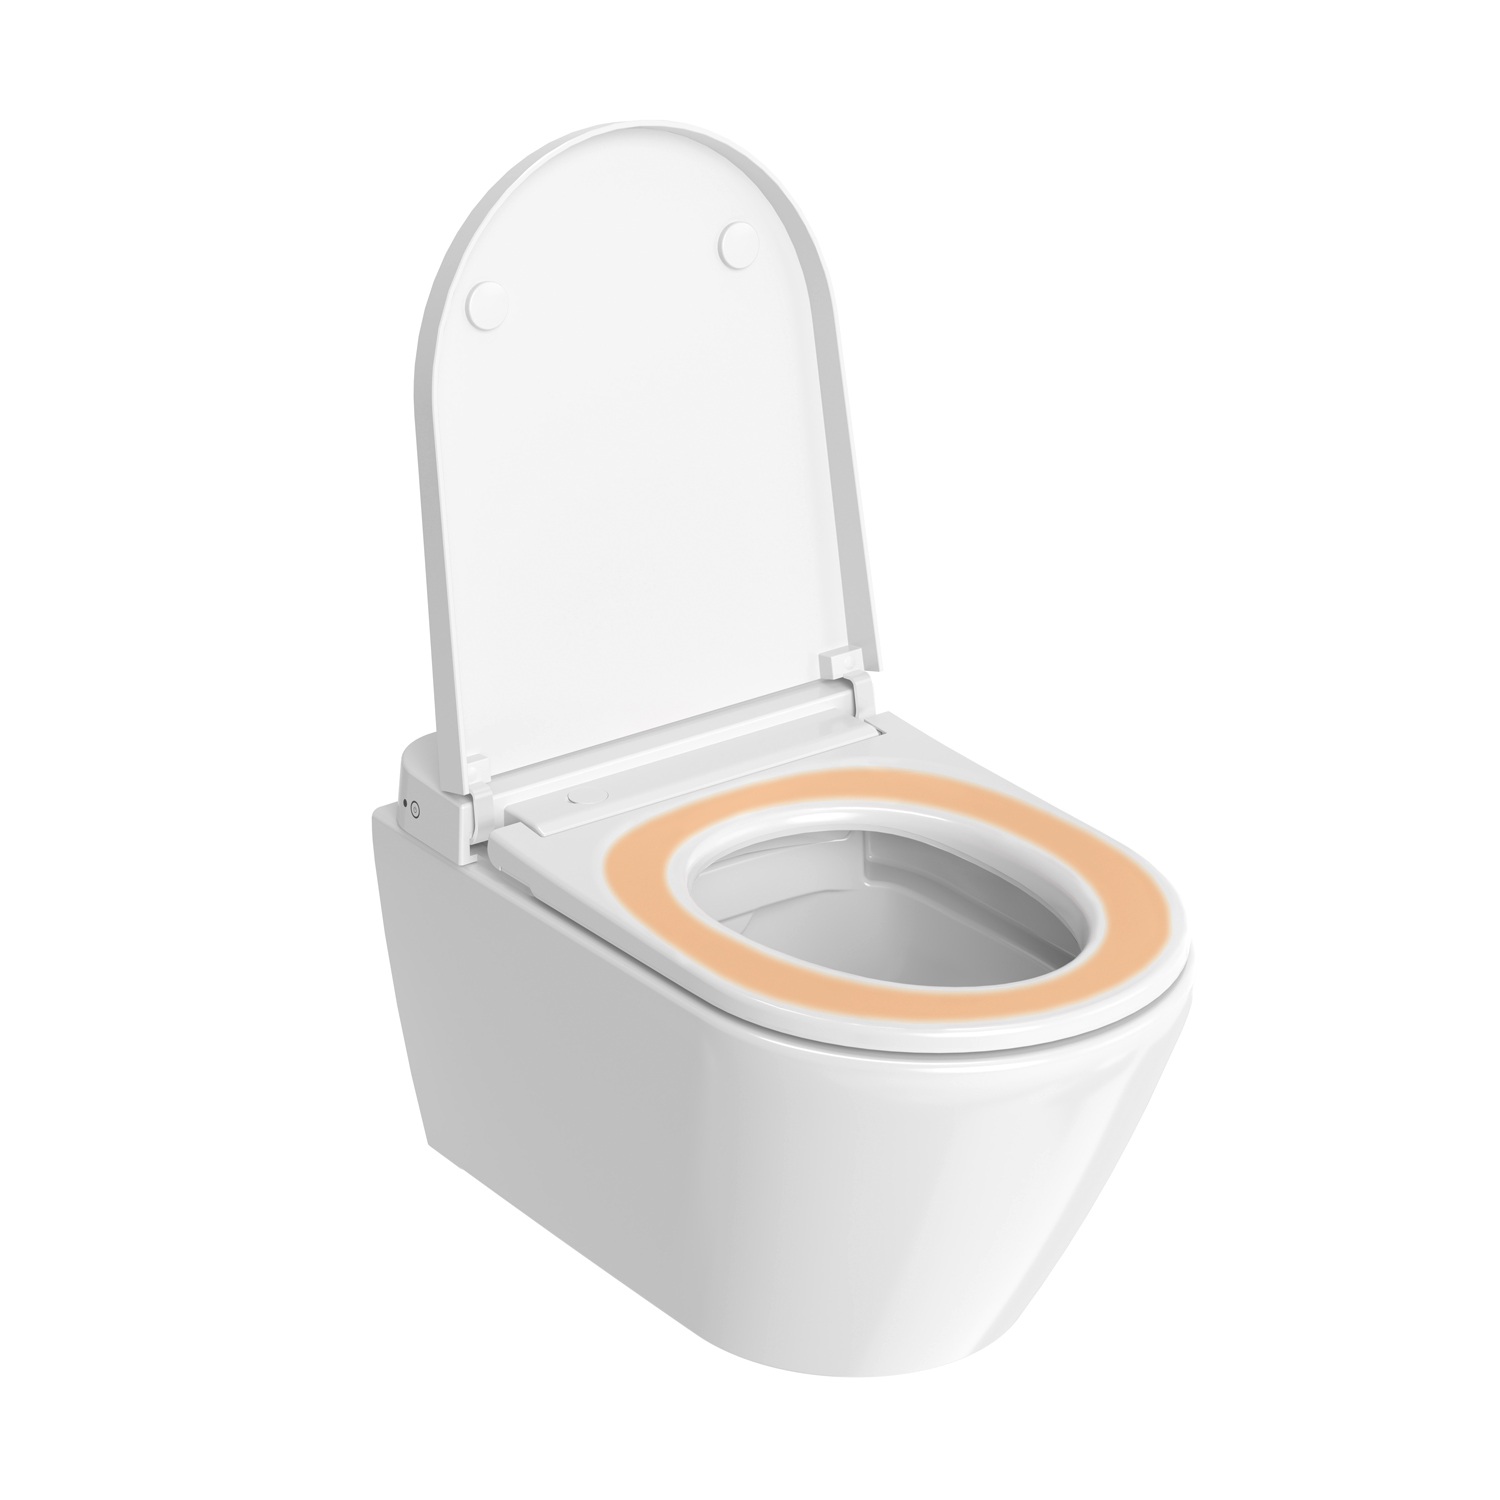 Toilet with Seat heater and Energy-saving mode
